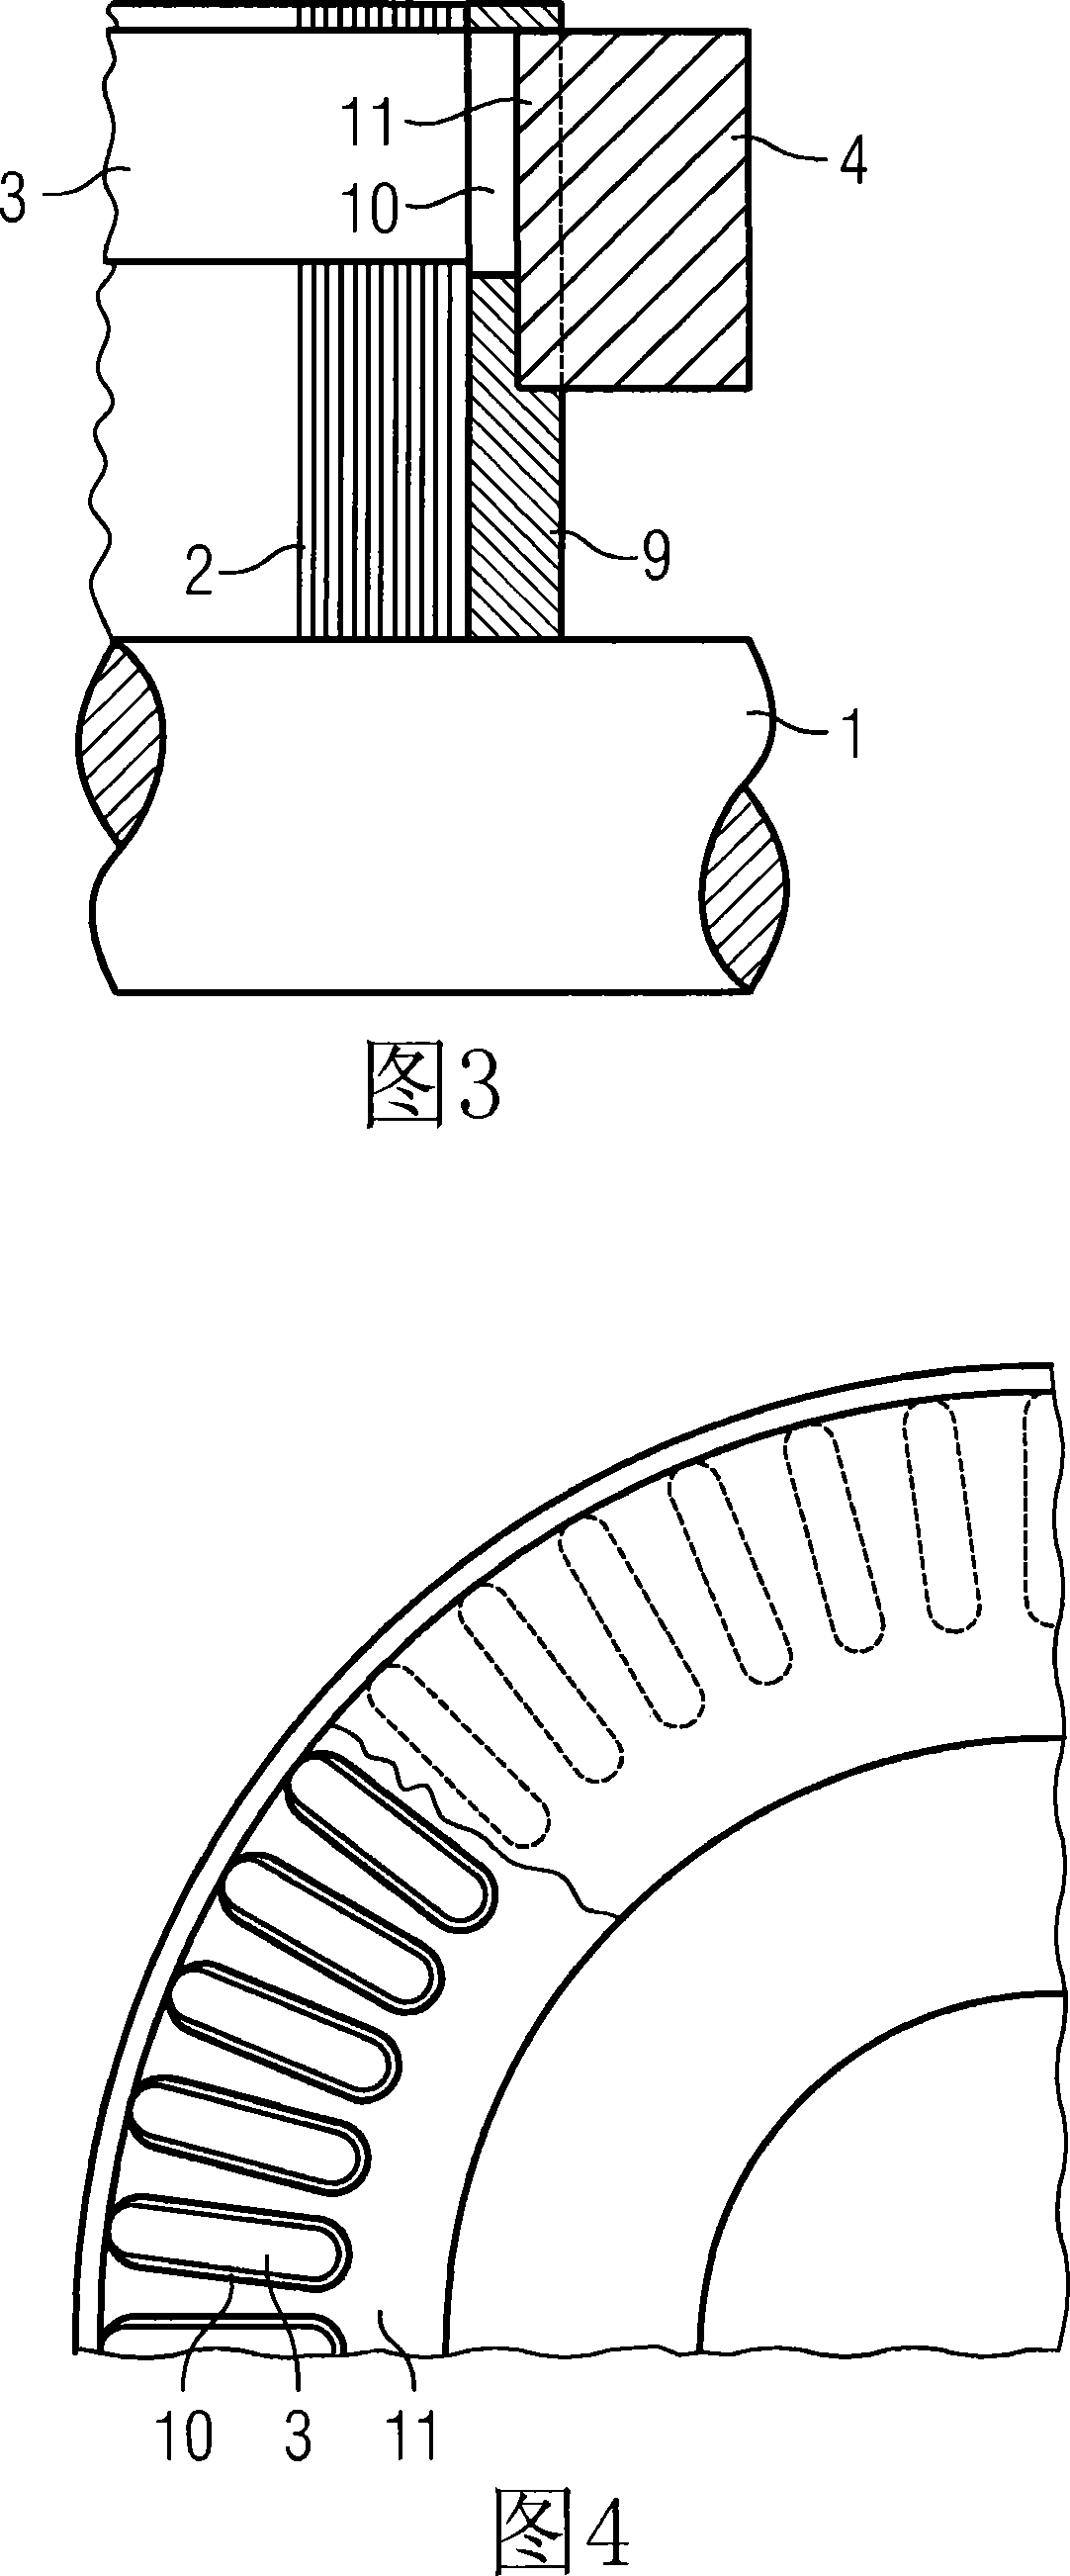 Cage rotor for an asynchronous motor